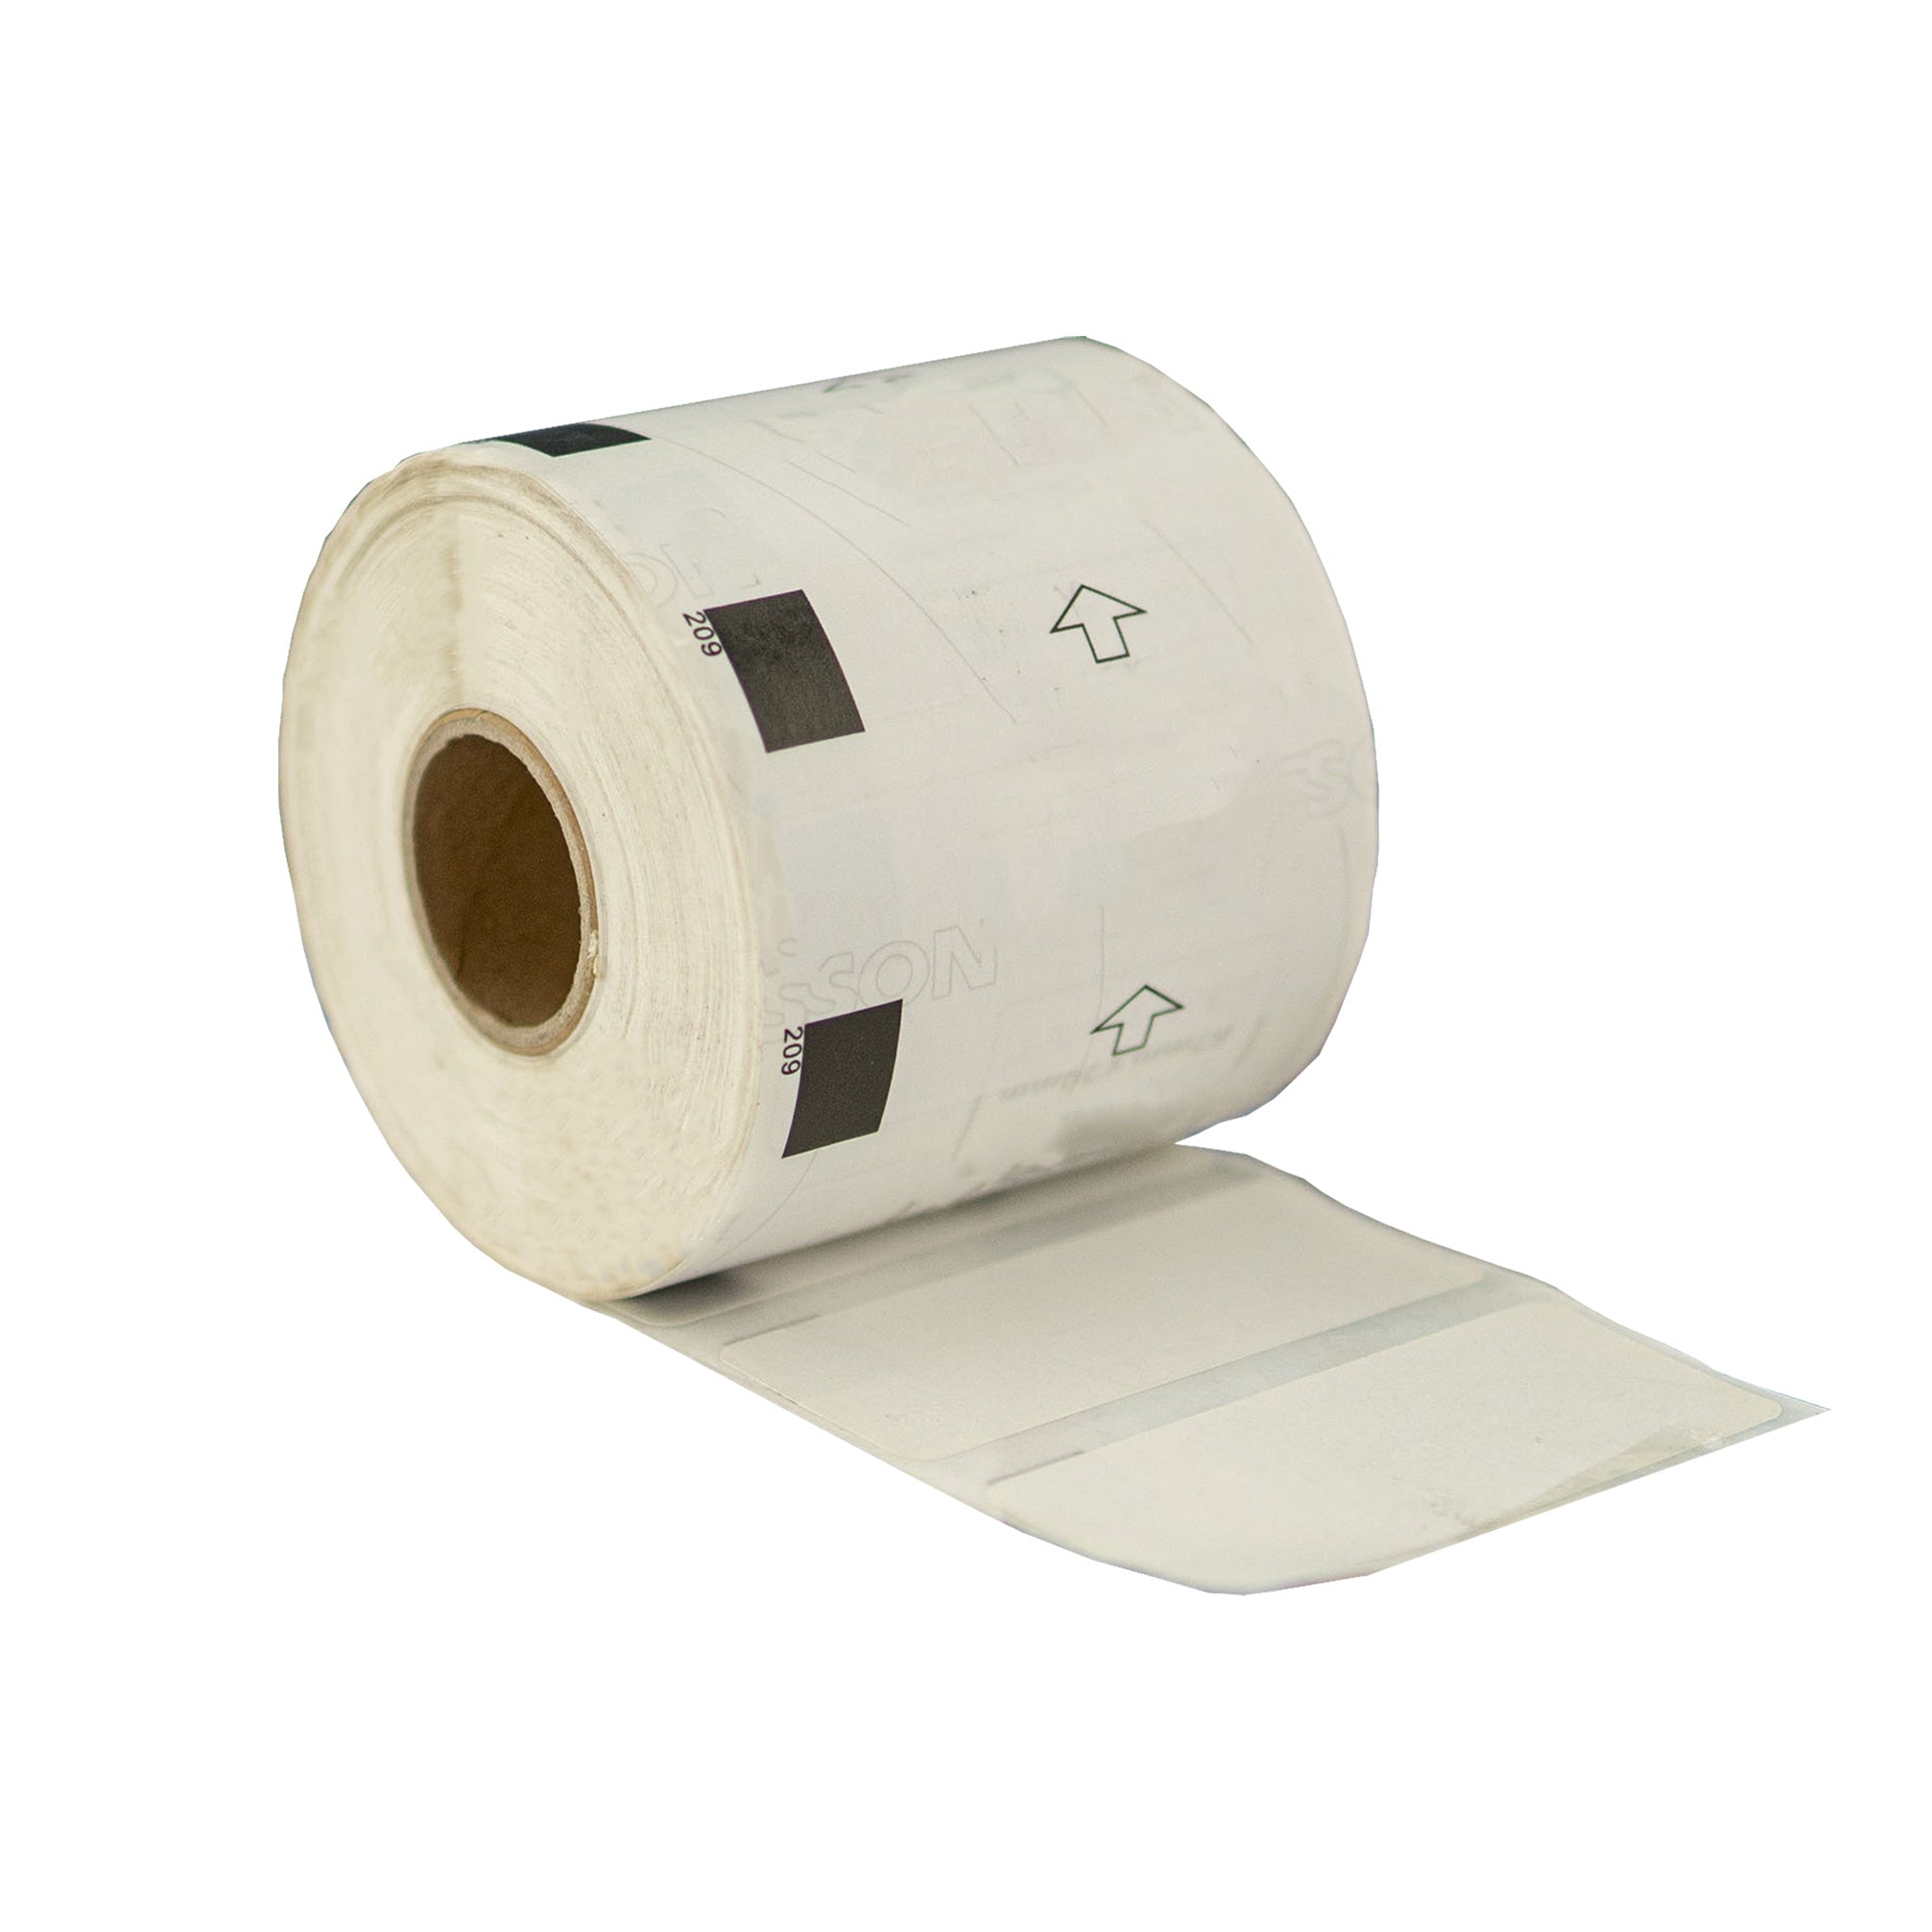 Compatible Brother DK-11209 Address Refill Labels 62 x 29mm/ 50 Rolls